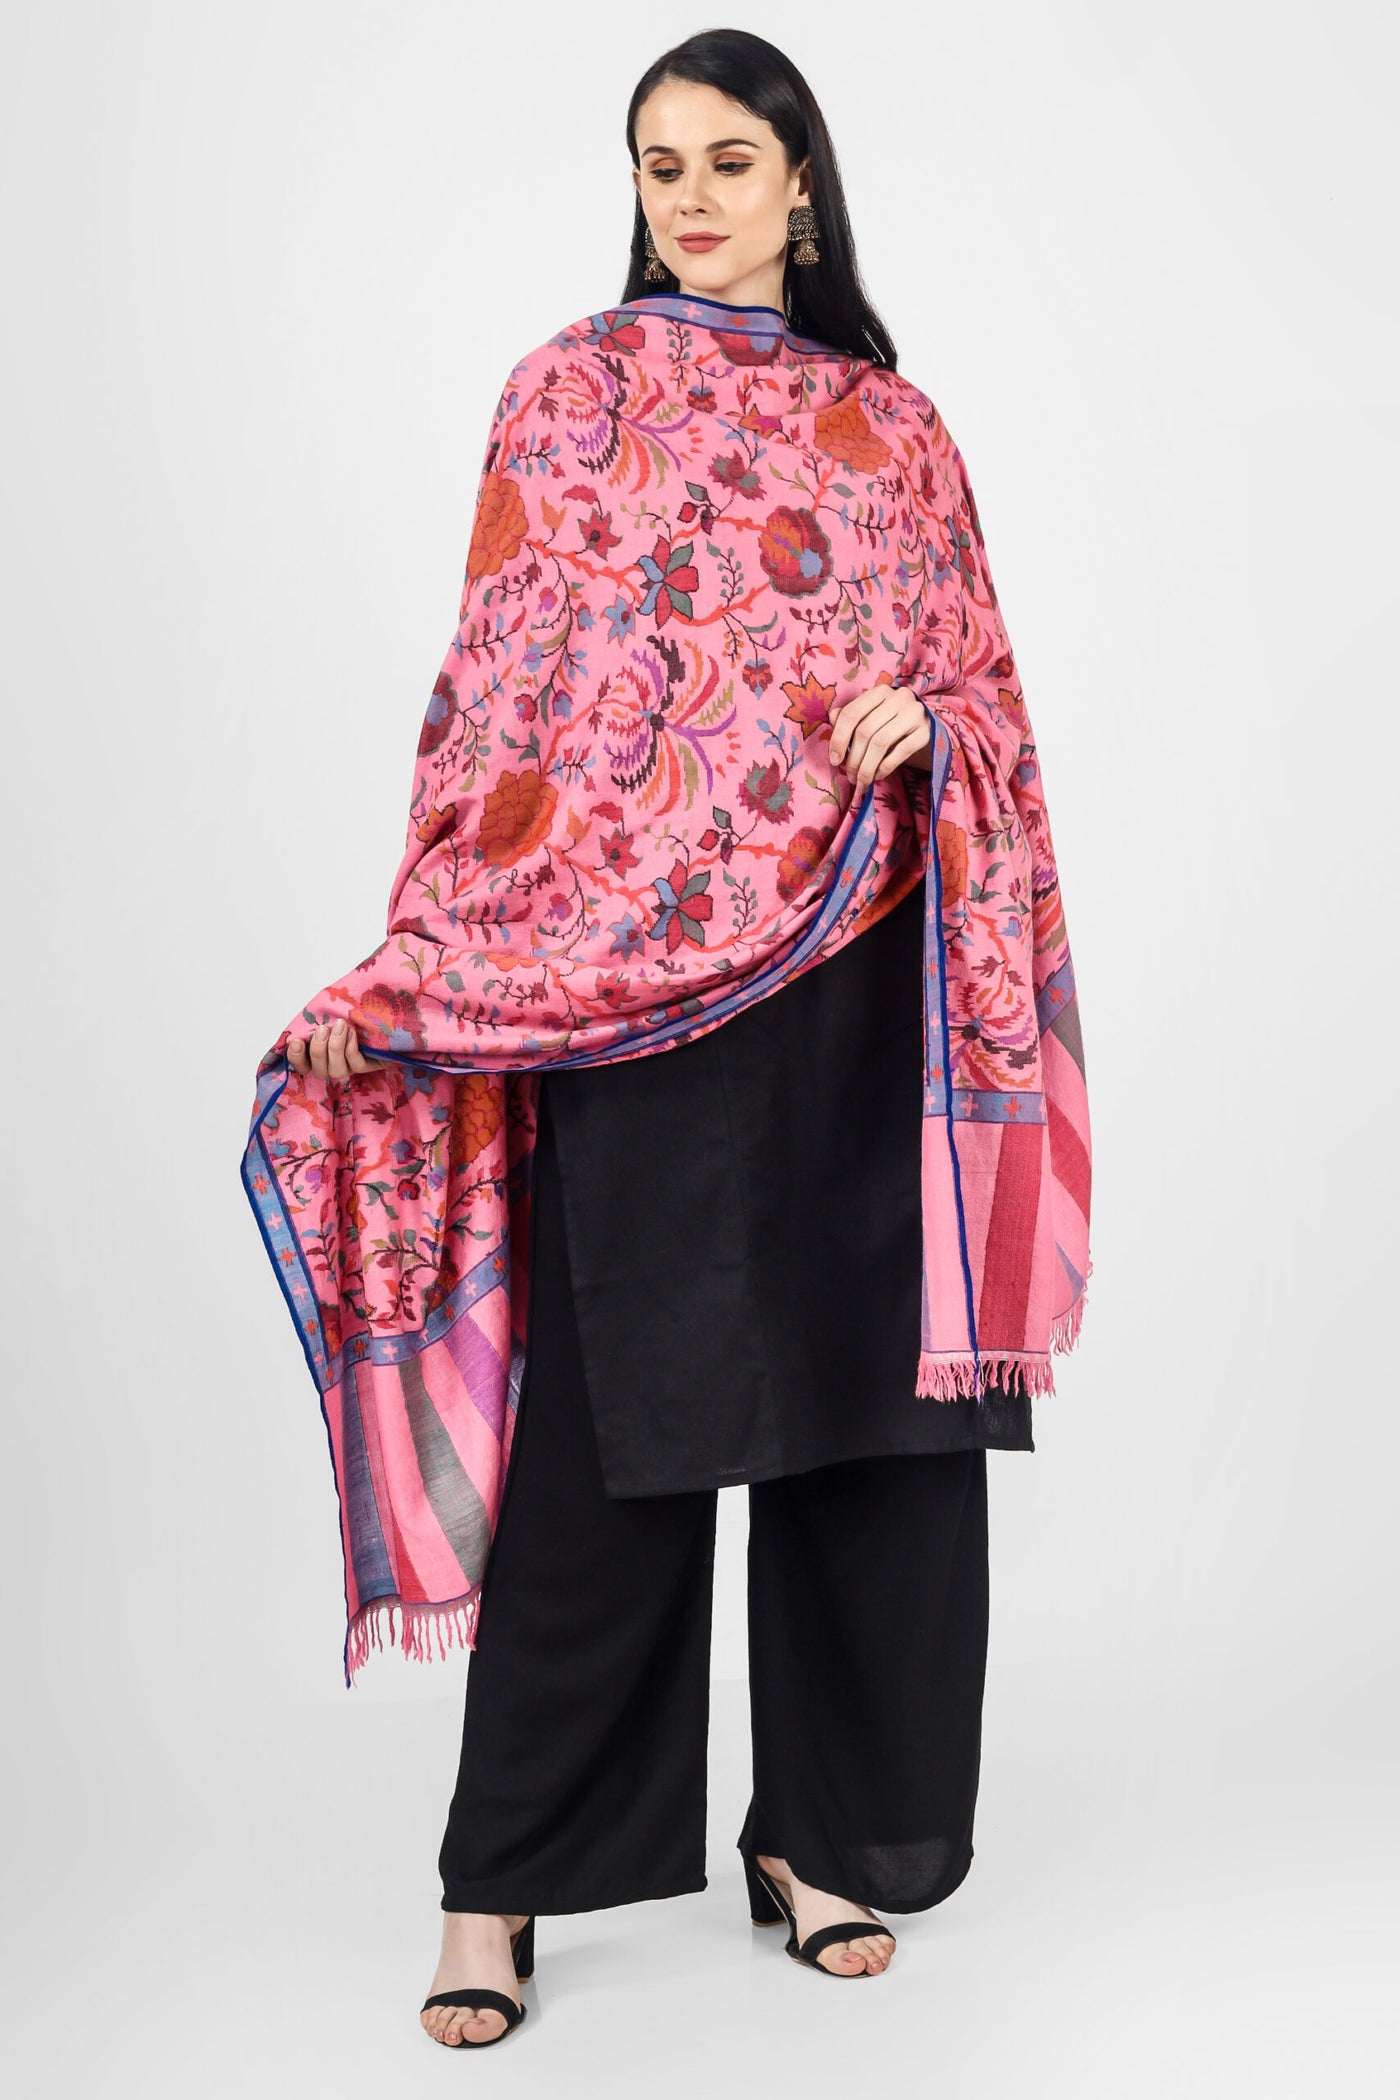 The blooming almond blossoms direct from the alcoves and gardens of Kashmir are directly designed on a pink Pashmina Shawl in Kani pattern.